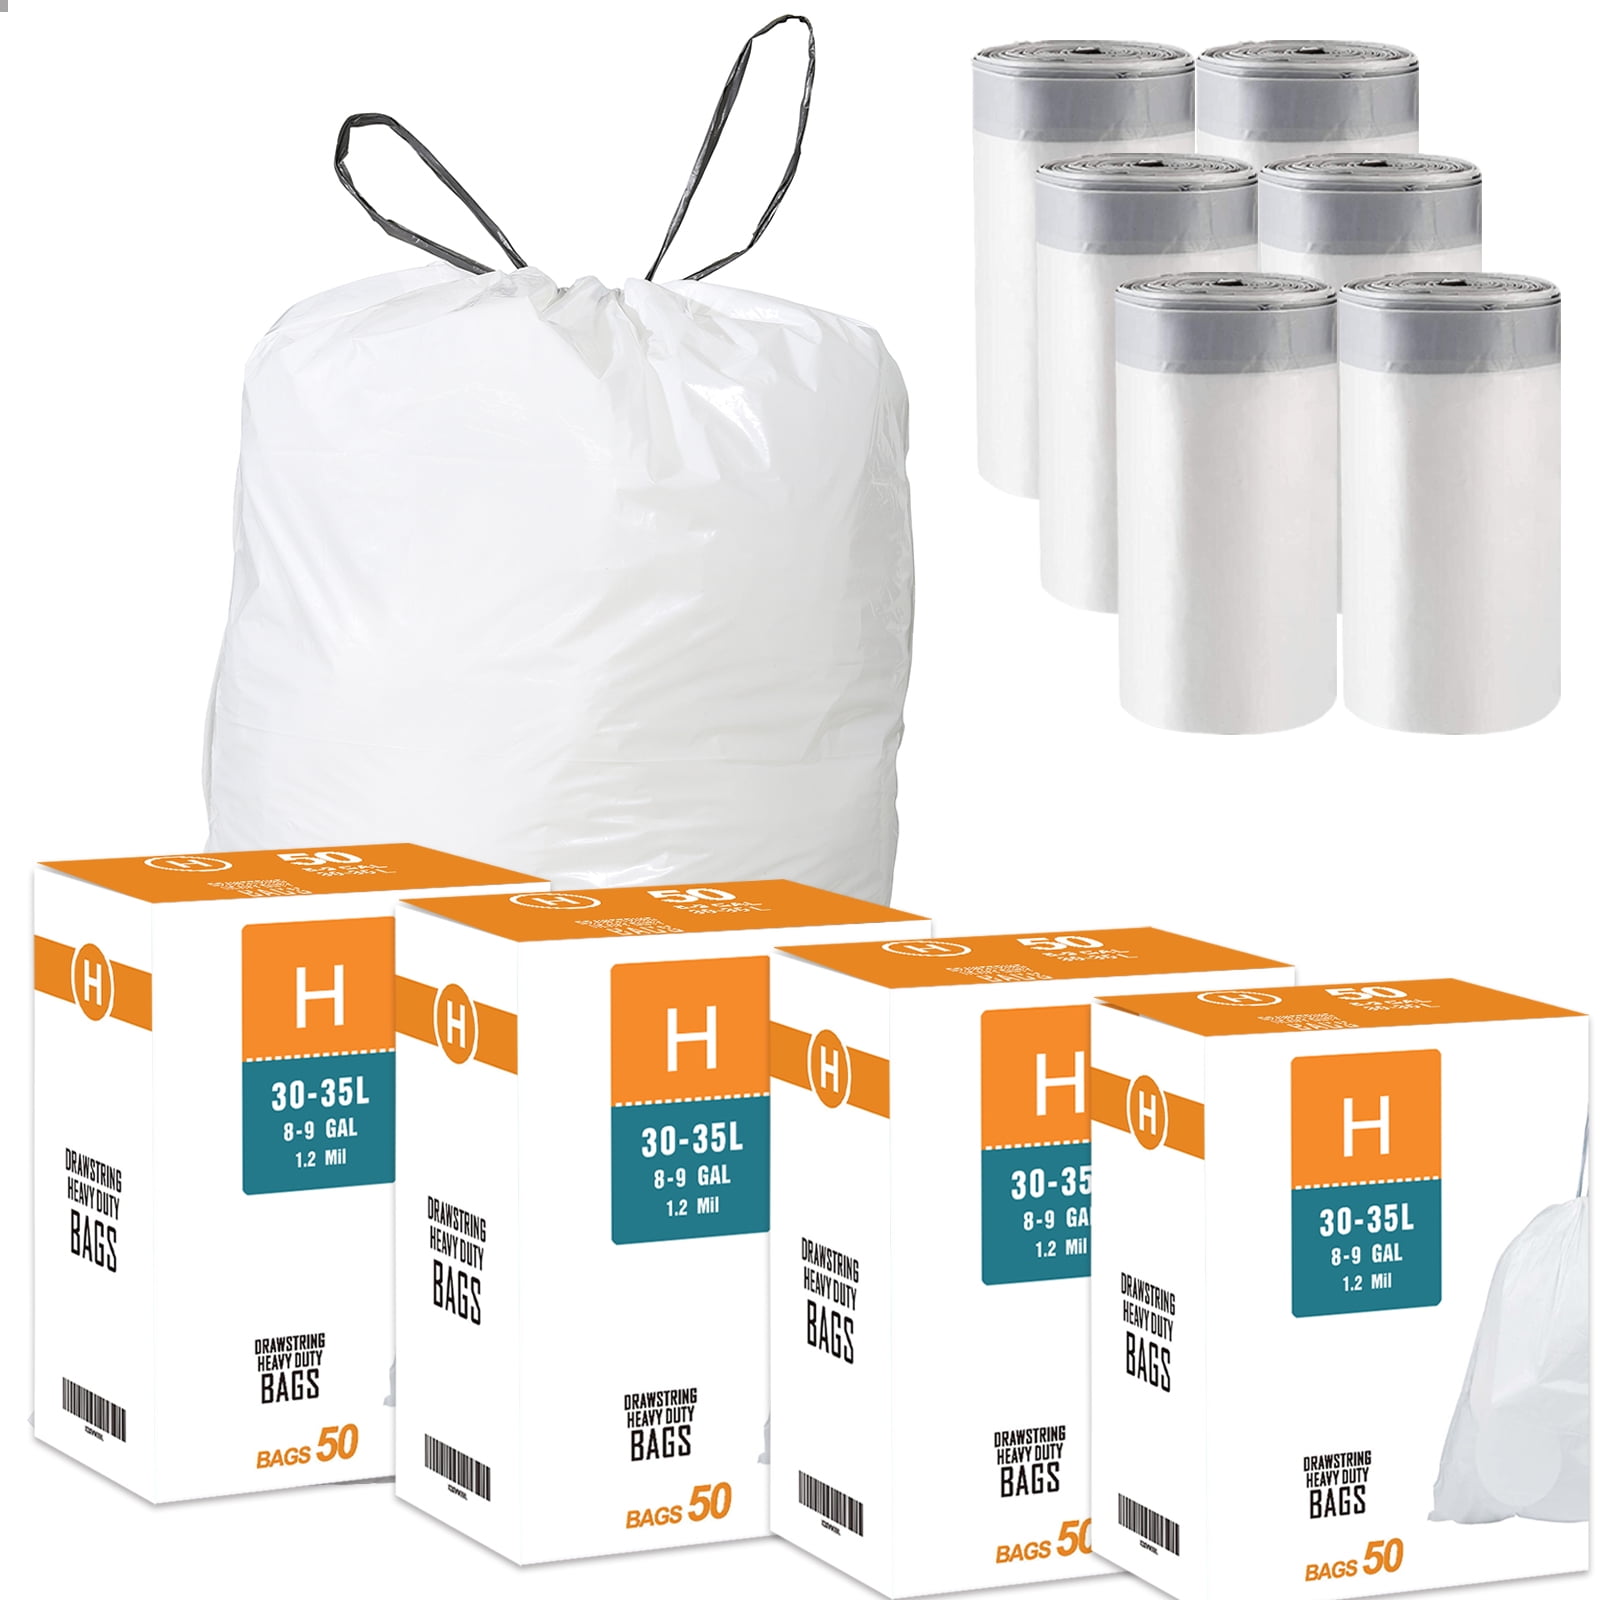 4 Packs(200 Count) Code H 8-9 Gallon Heavy Duty Drawstring Plastic Trash Bags Compatible with Code H | 1.2 Mil | White | 8-9 Gallon/30-35 Liter, Size